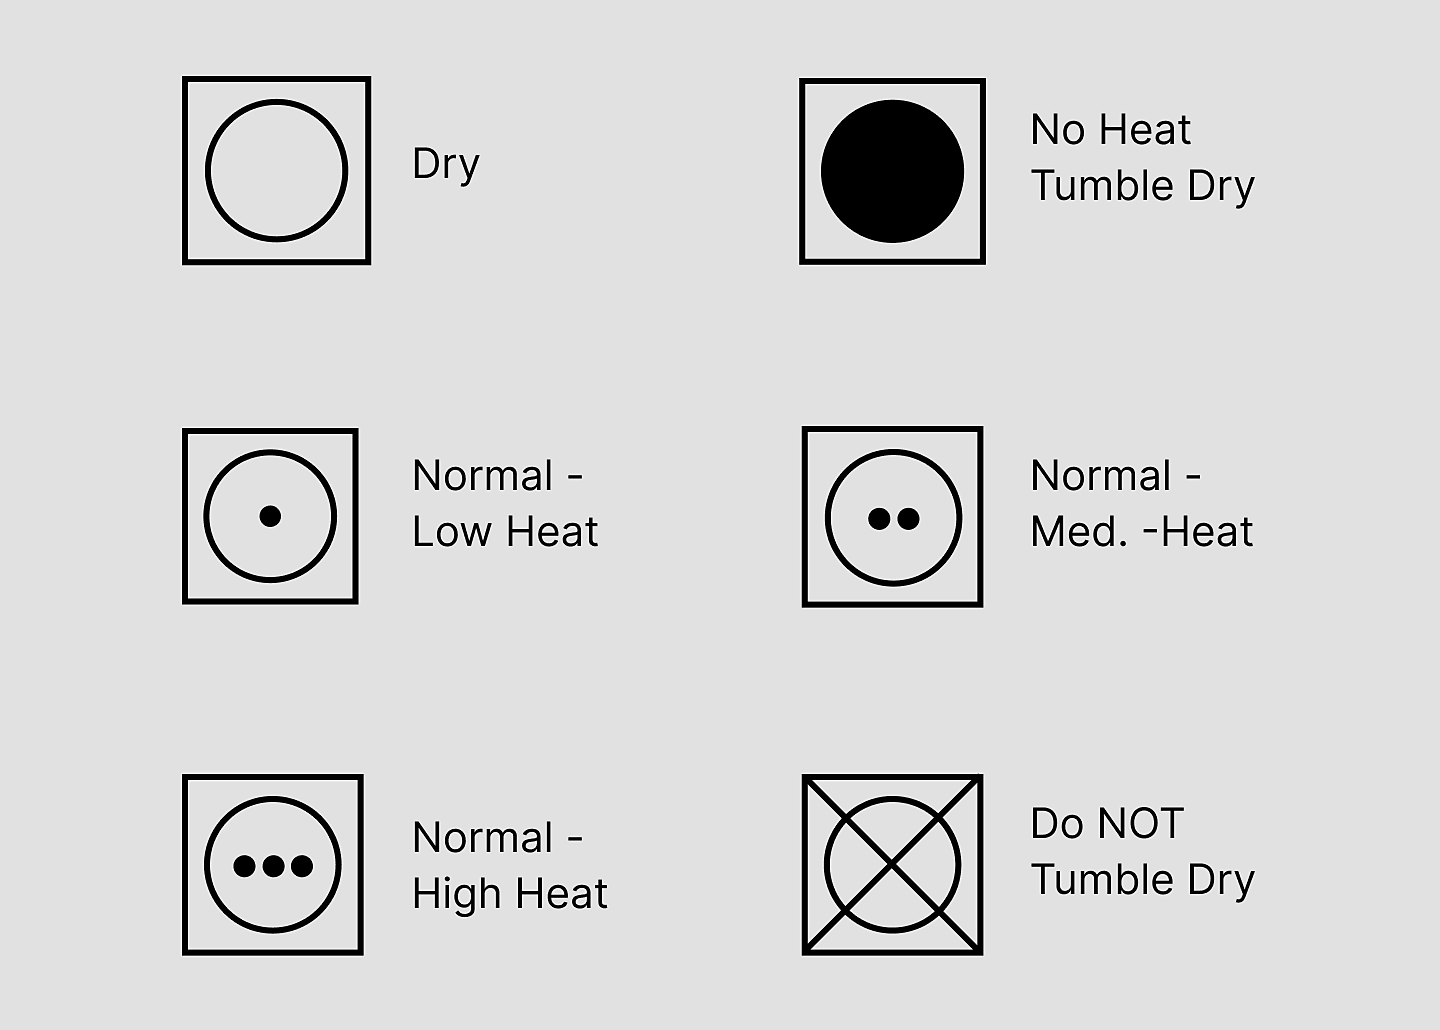 Is Tumble Dry? Learn to Tumble Dry | Whirlpool